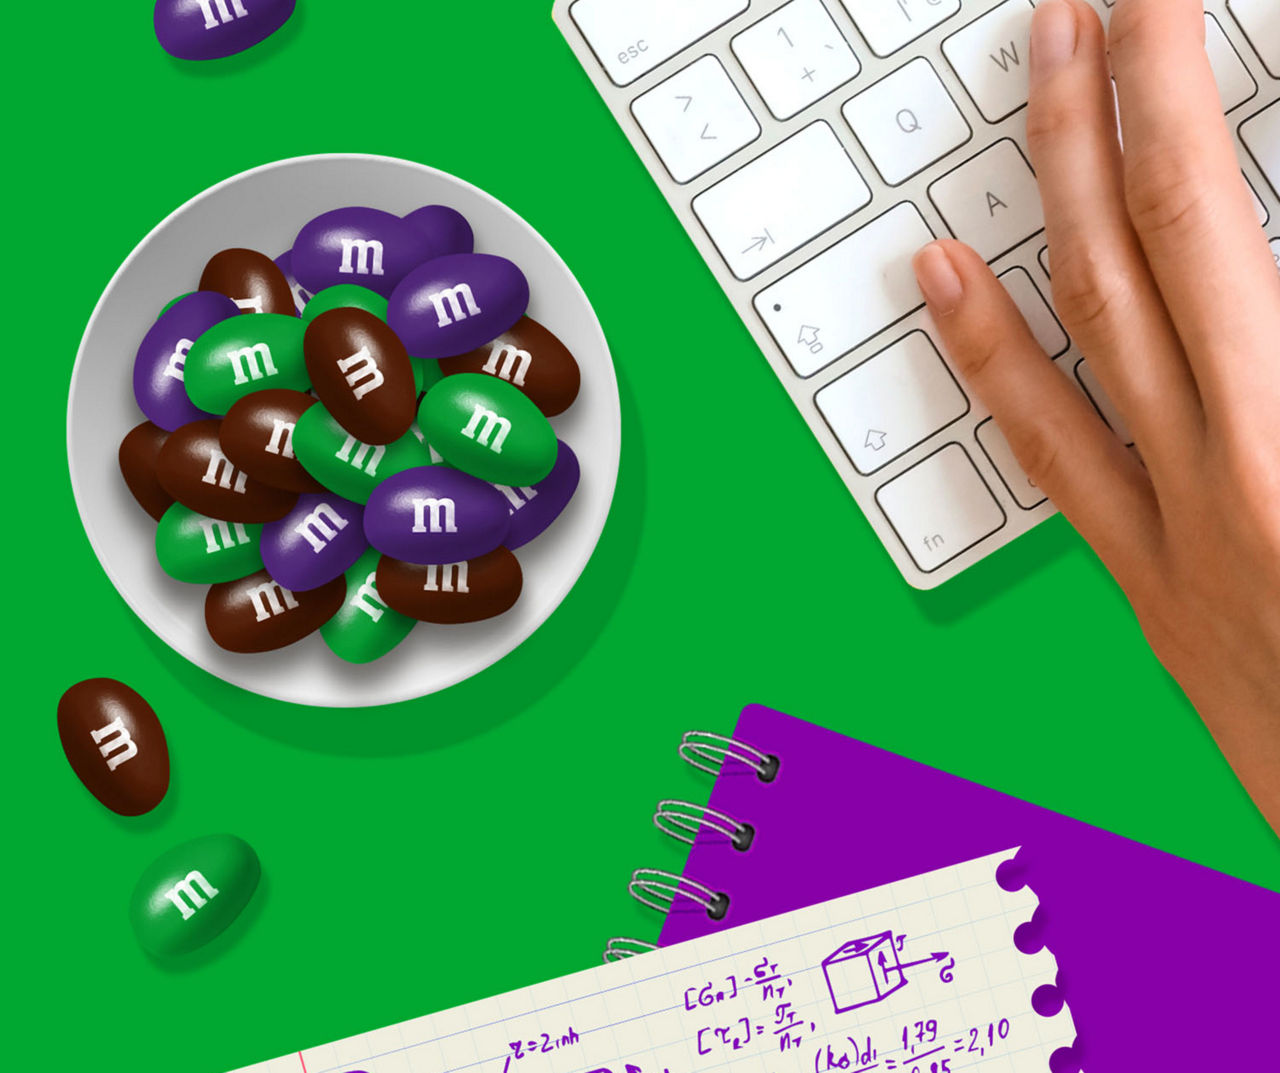 M&M'S Limited Edition Peanut Milk Chocolate Candy featuring Purple Candy Bag,  1.74 oz - Harris Teeter